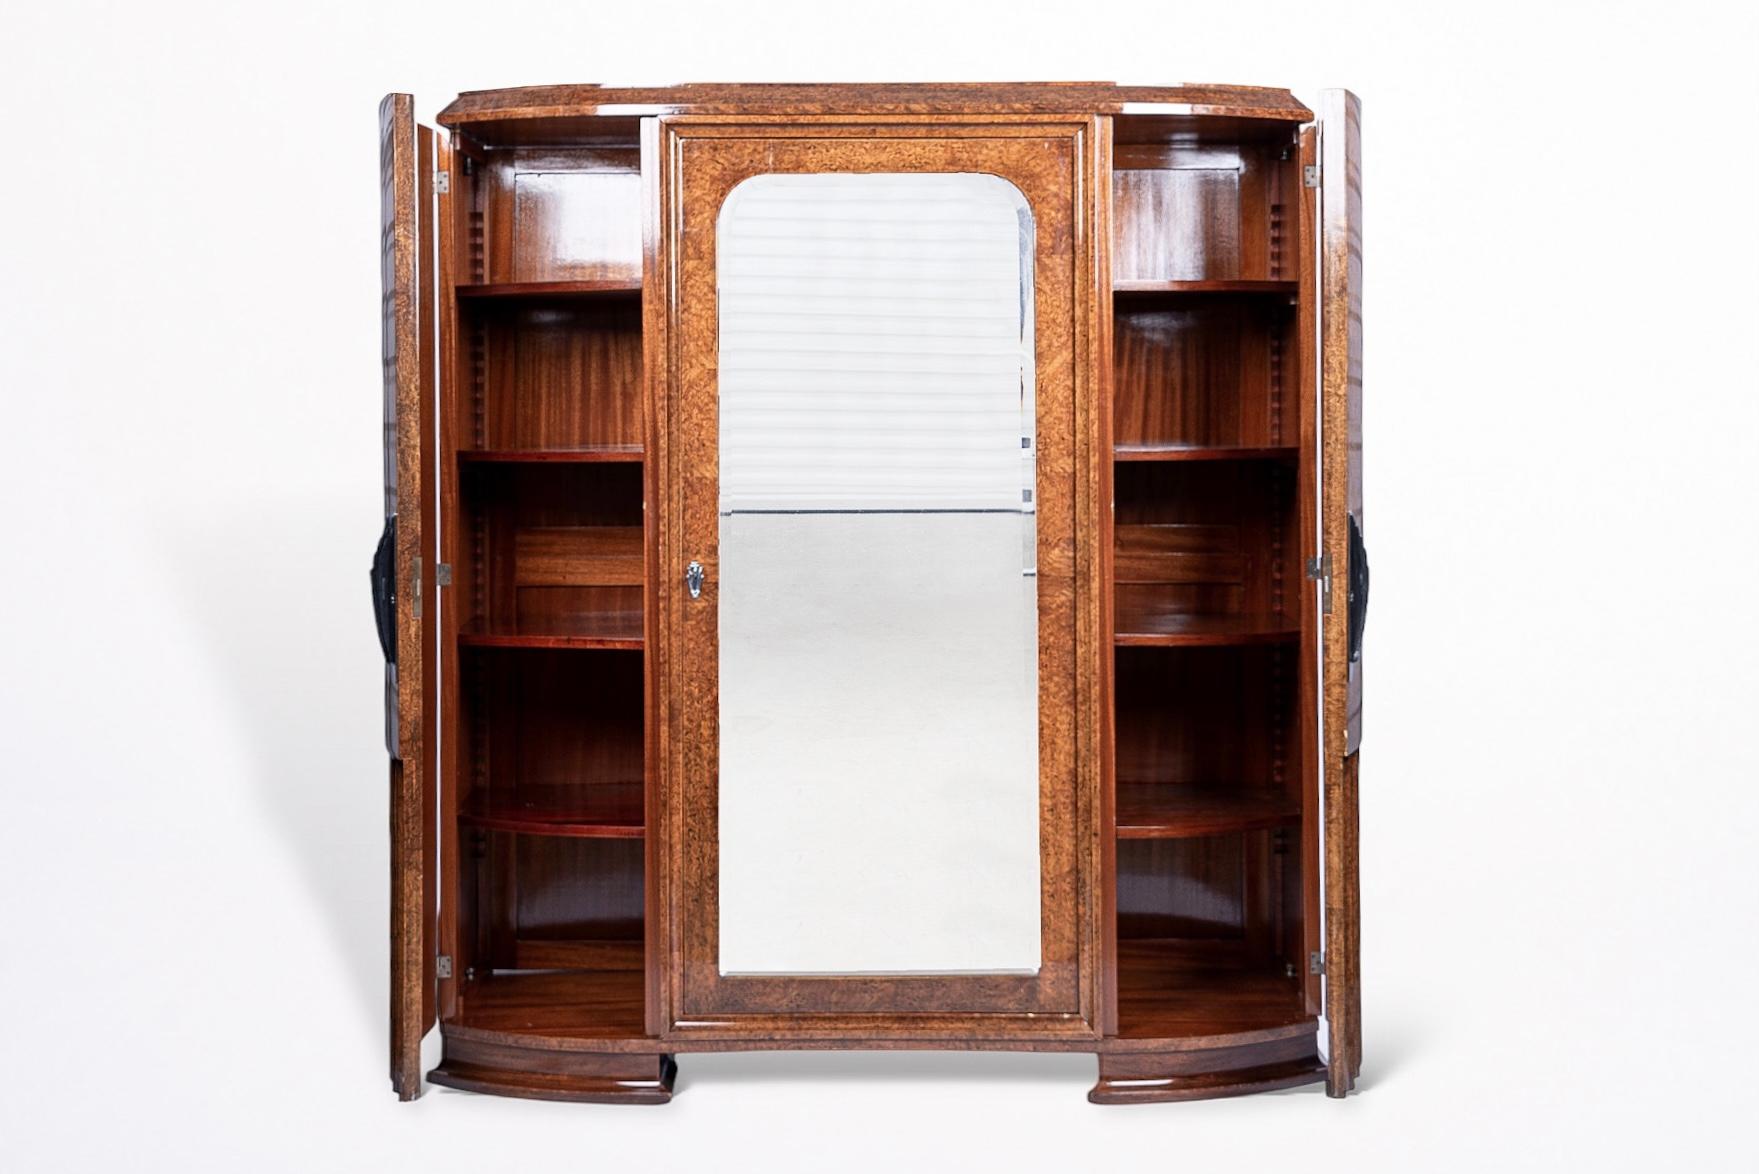 Hand-Crafted 1930s French Art Deco Burl Wood Mirrored Armoire Cabinet